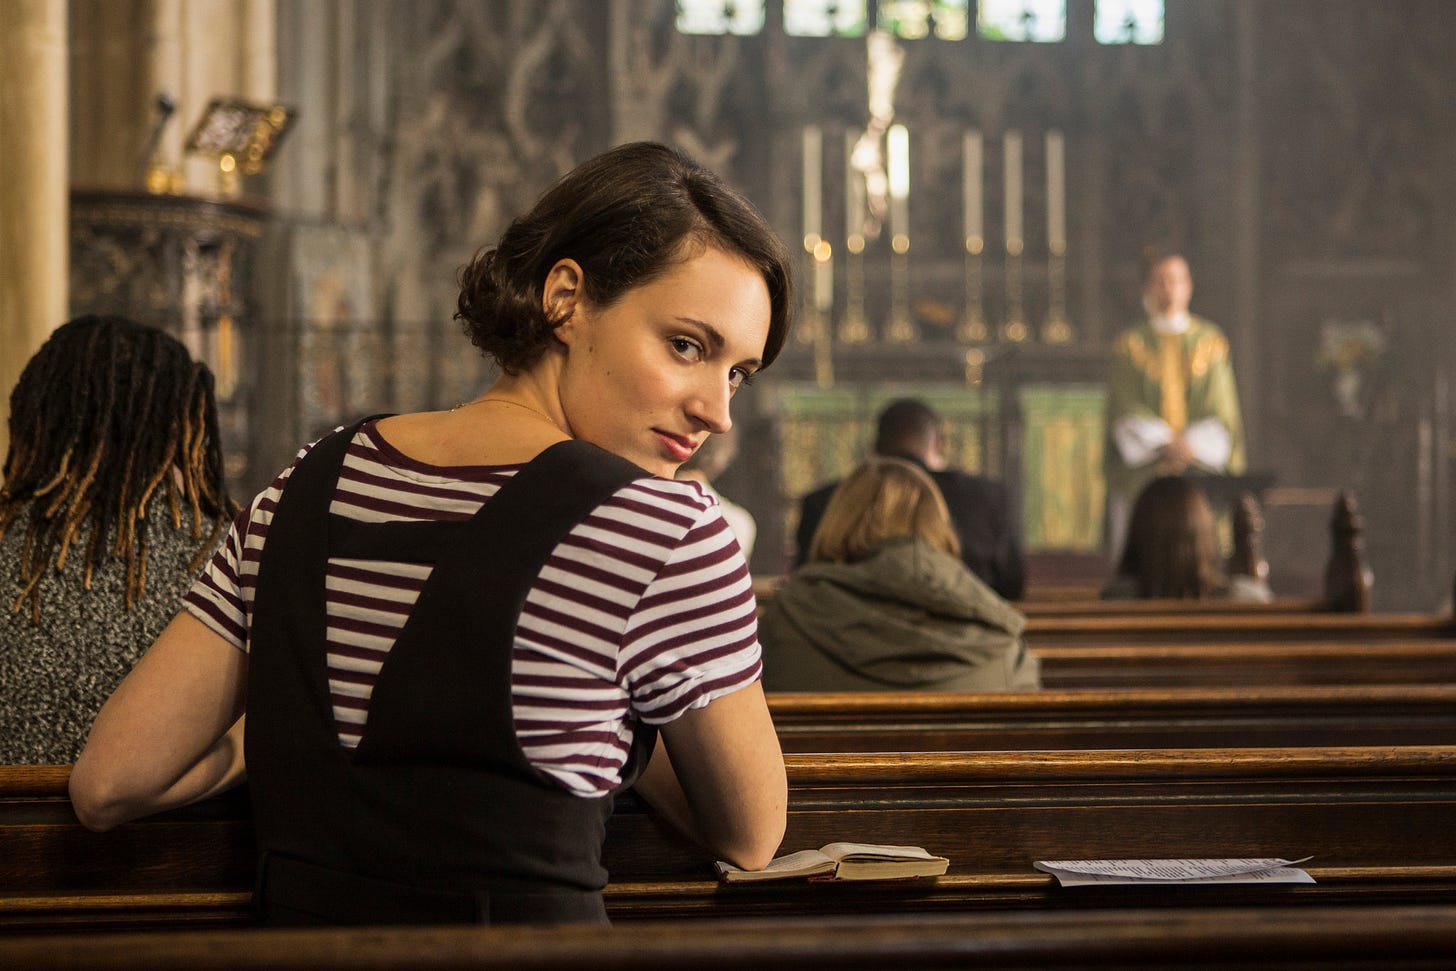 Fleabag praying in a church, but sharing an intimate moment with the viewers.